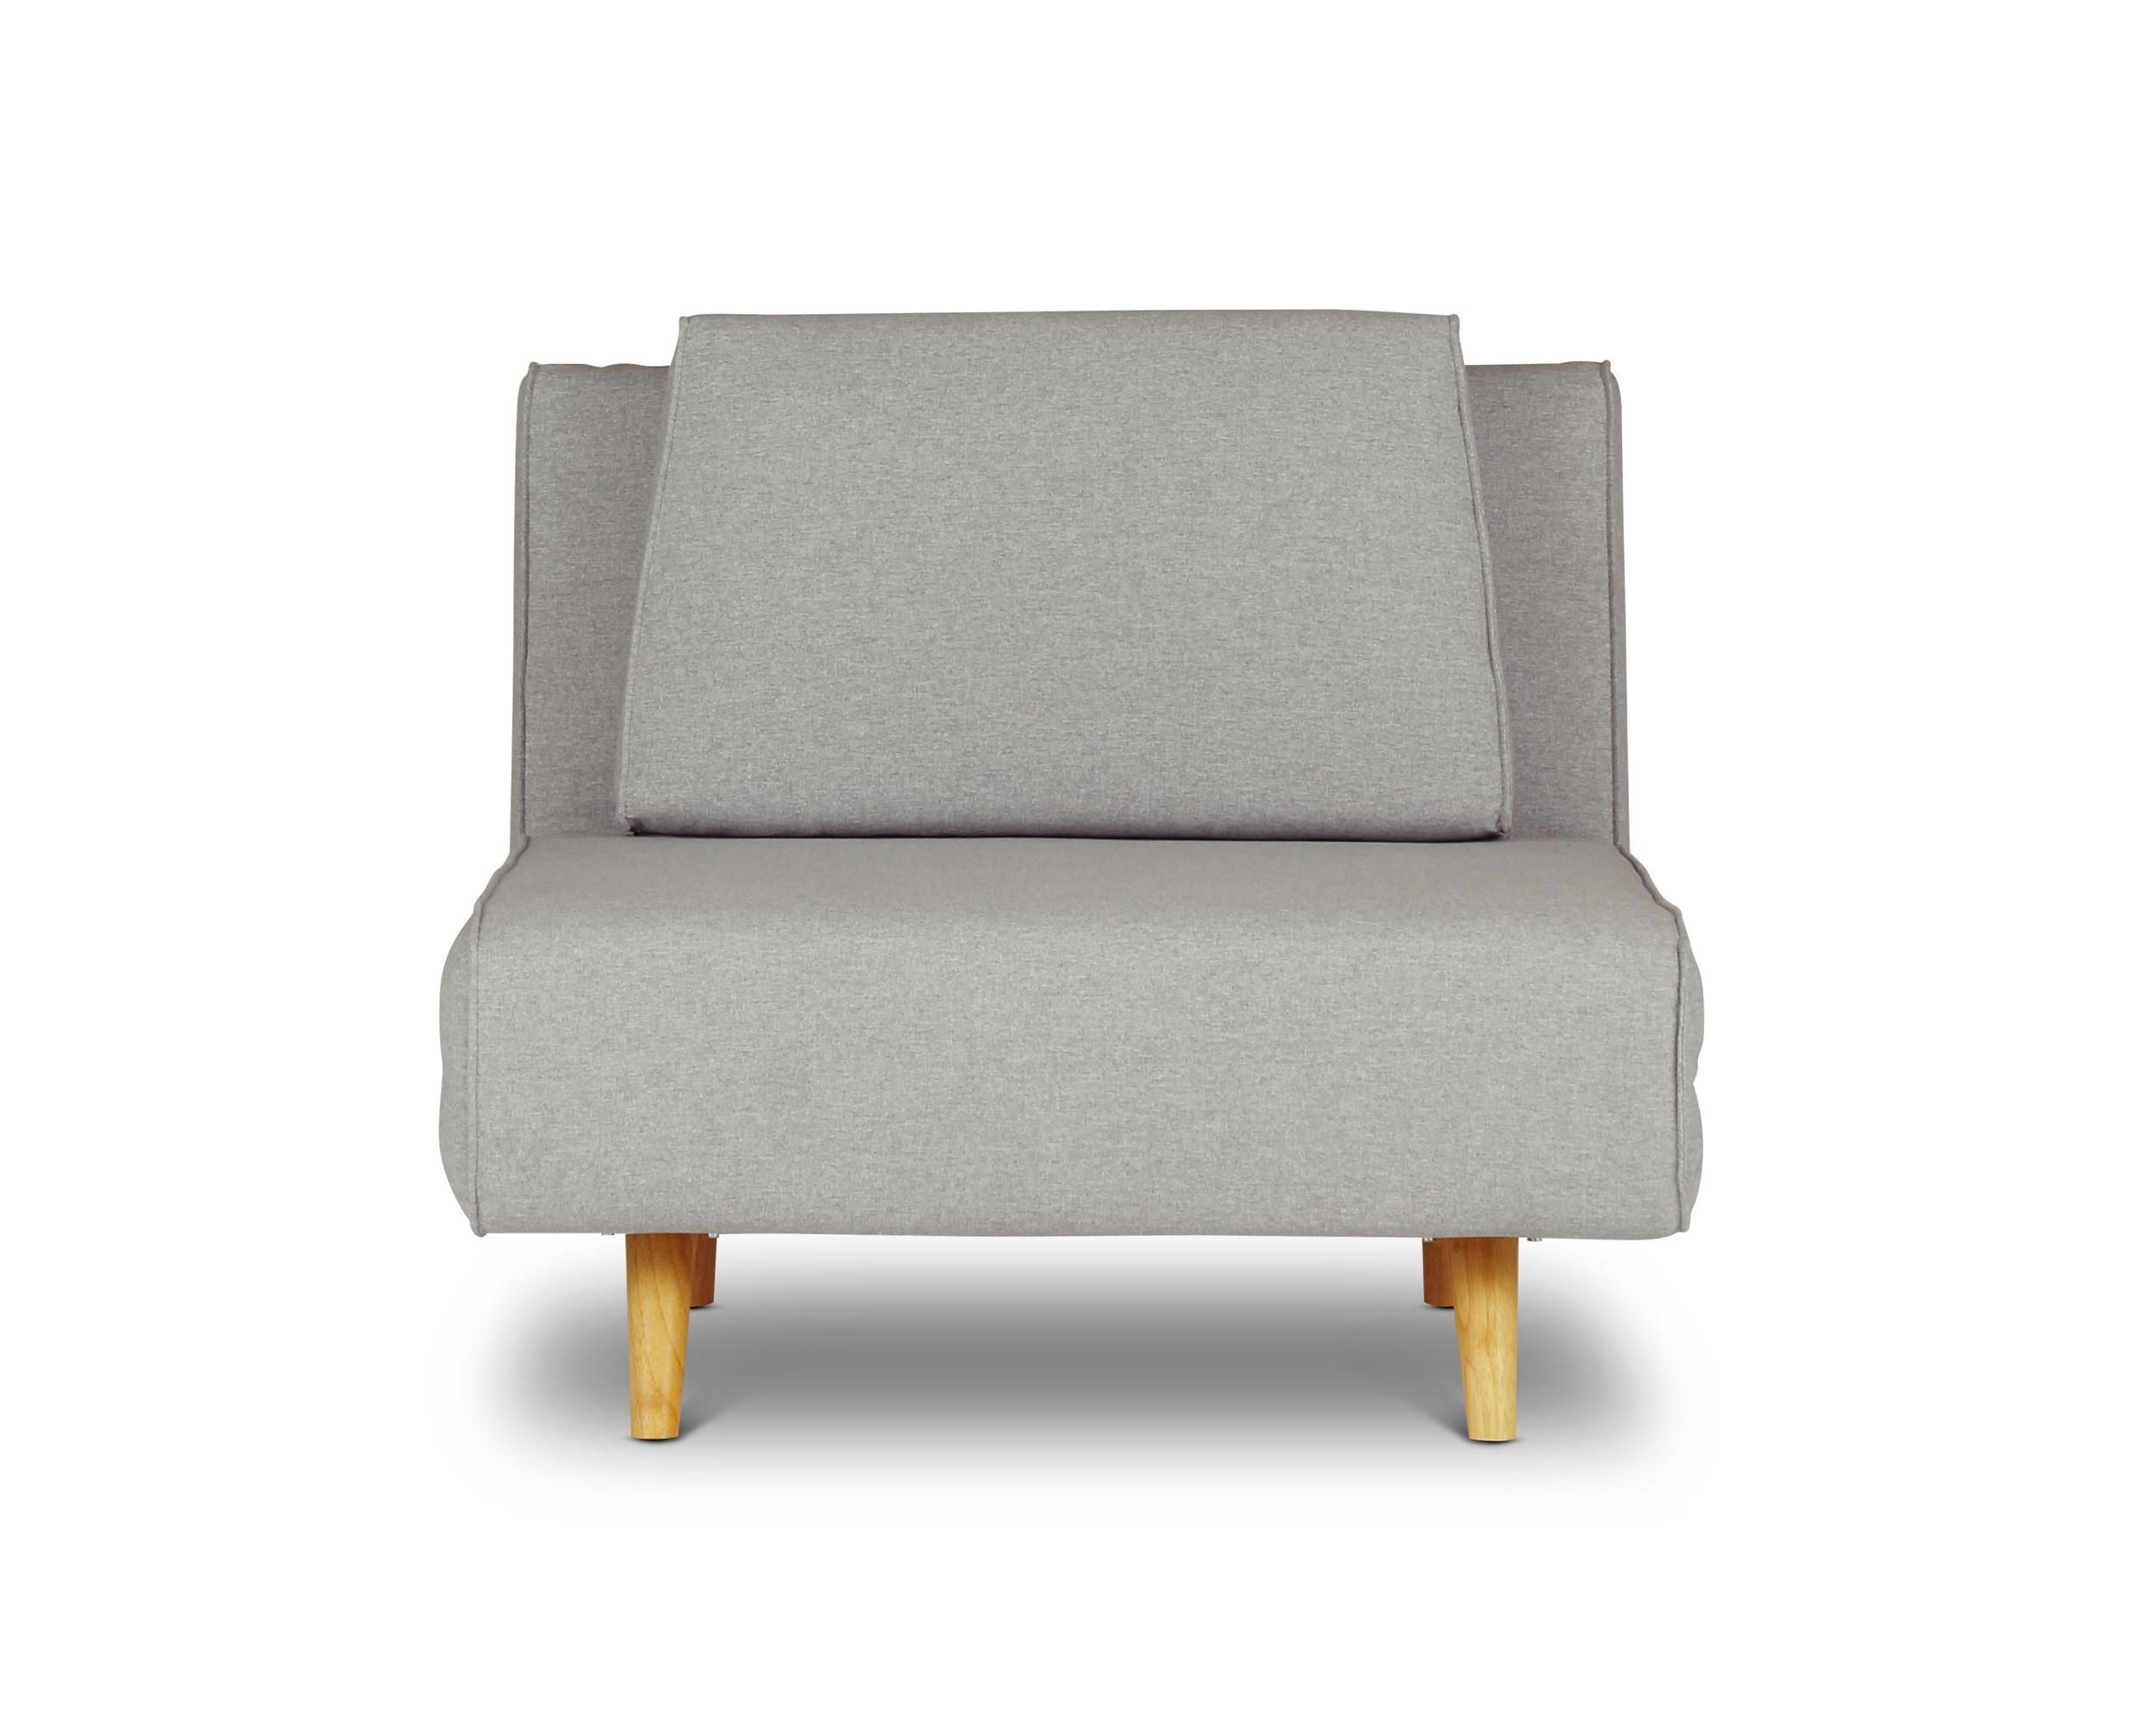 Sofa Armchair | Sofa Gallery | Kengire In Single Sofa Chairs (View 20 of 20)